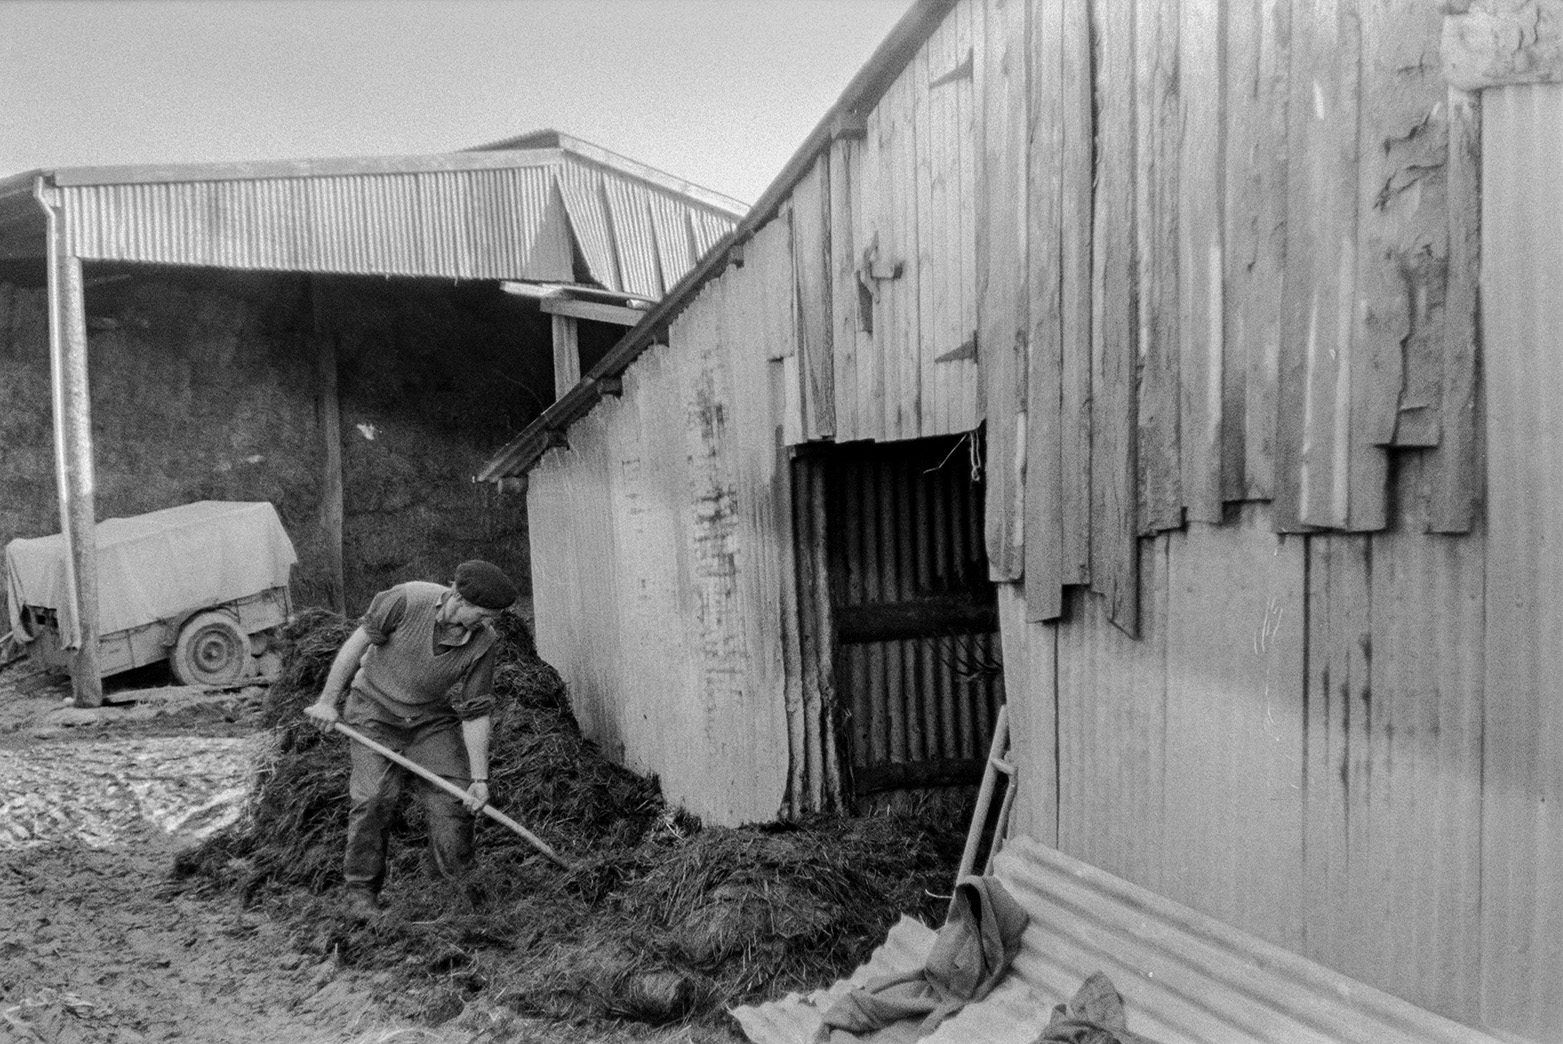 Ivor Bourne mucking out corrugated iron sheds in a farmyard at Mill Road Farm, Beaford. Hay bales in a corrugated iron barn can be seen in the background. The farm was also known as Jeffrys.